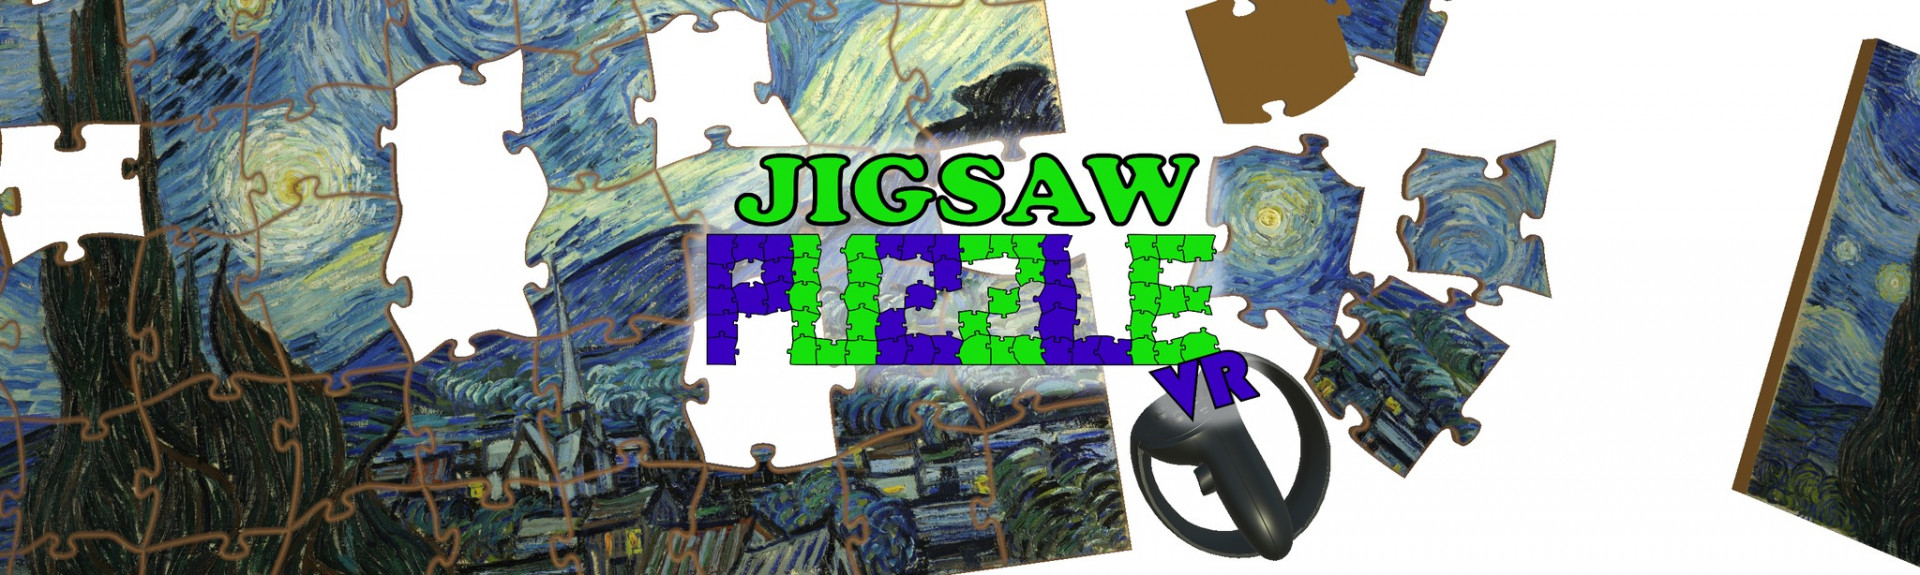 Jigsaw Puzzle VR